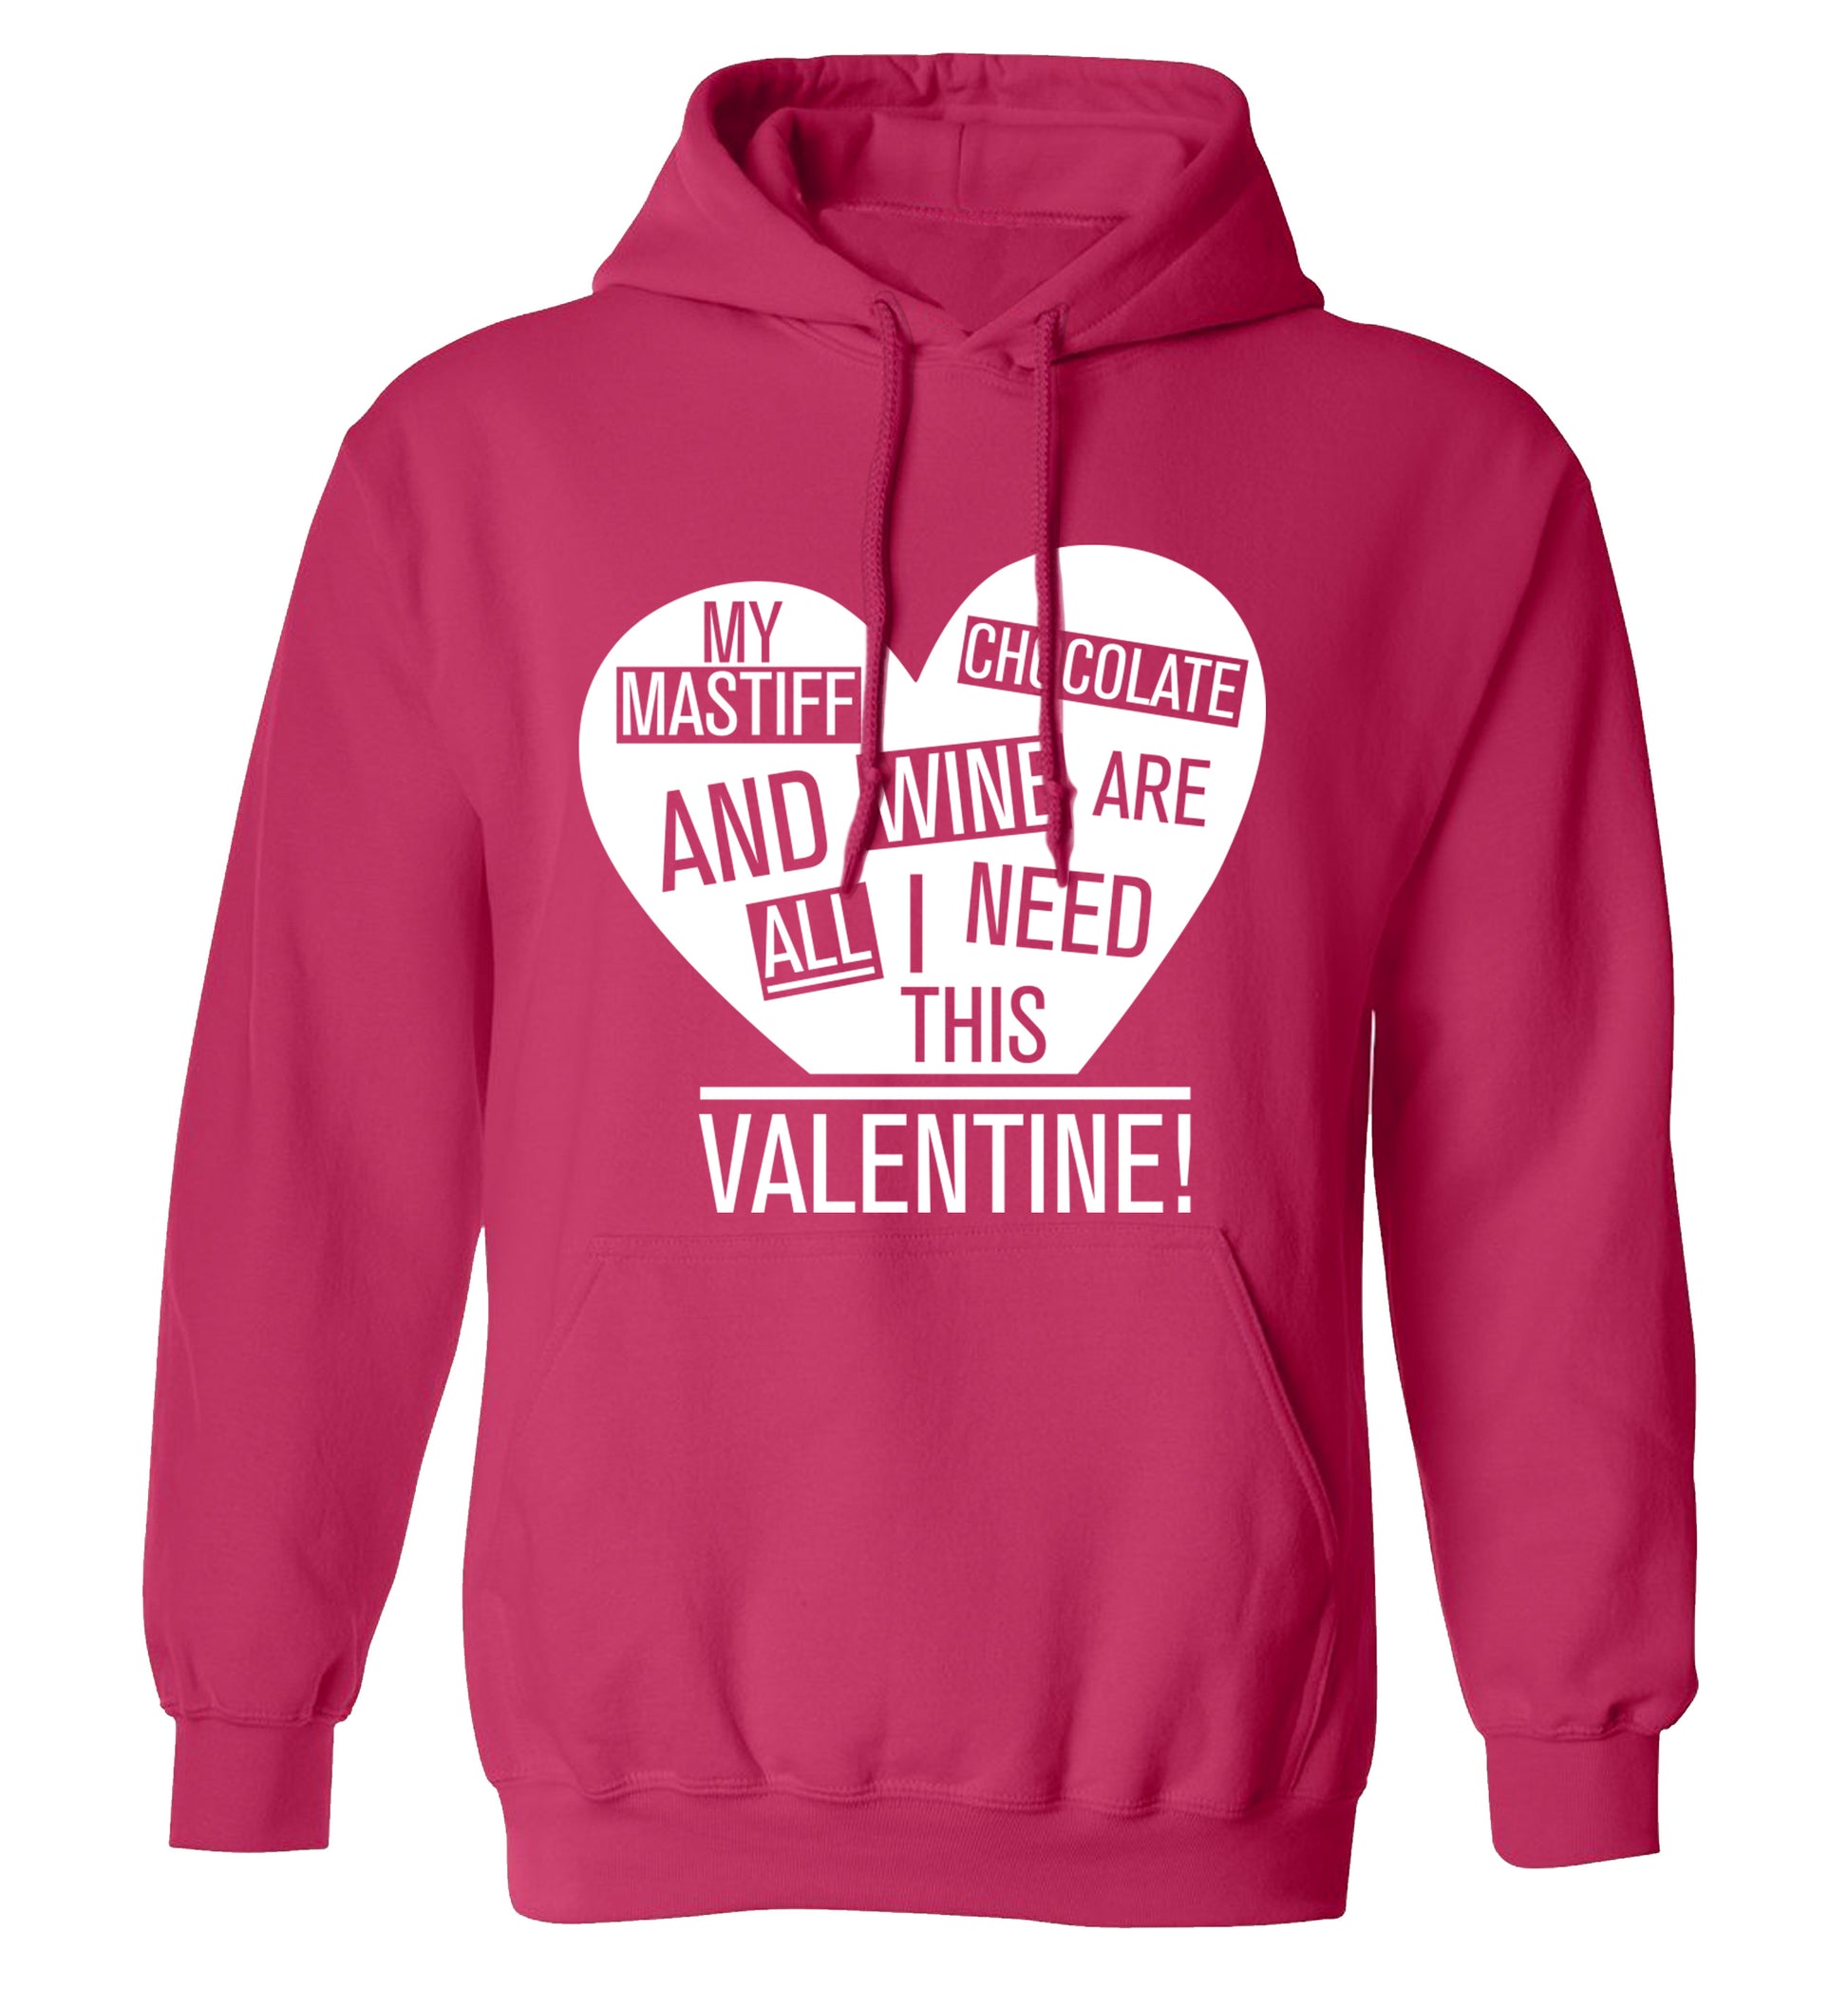 My mastiff, chocolate and wine are all I need this valentine! adults unisex pink hoodie 2XL